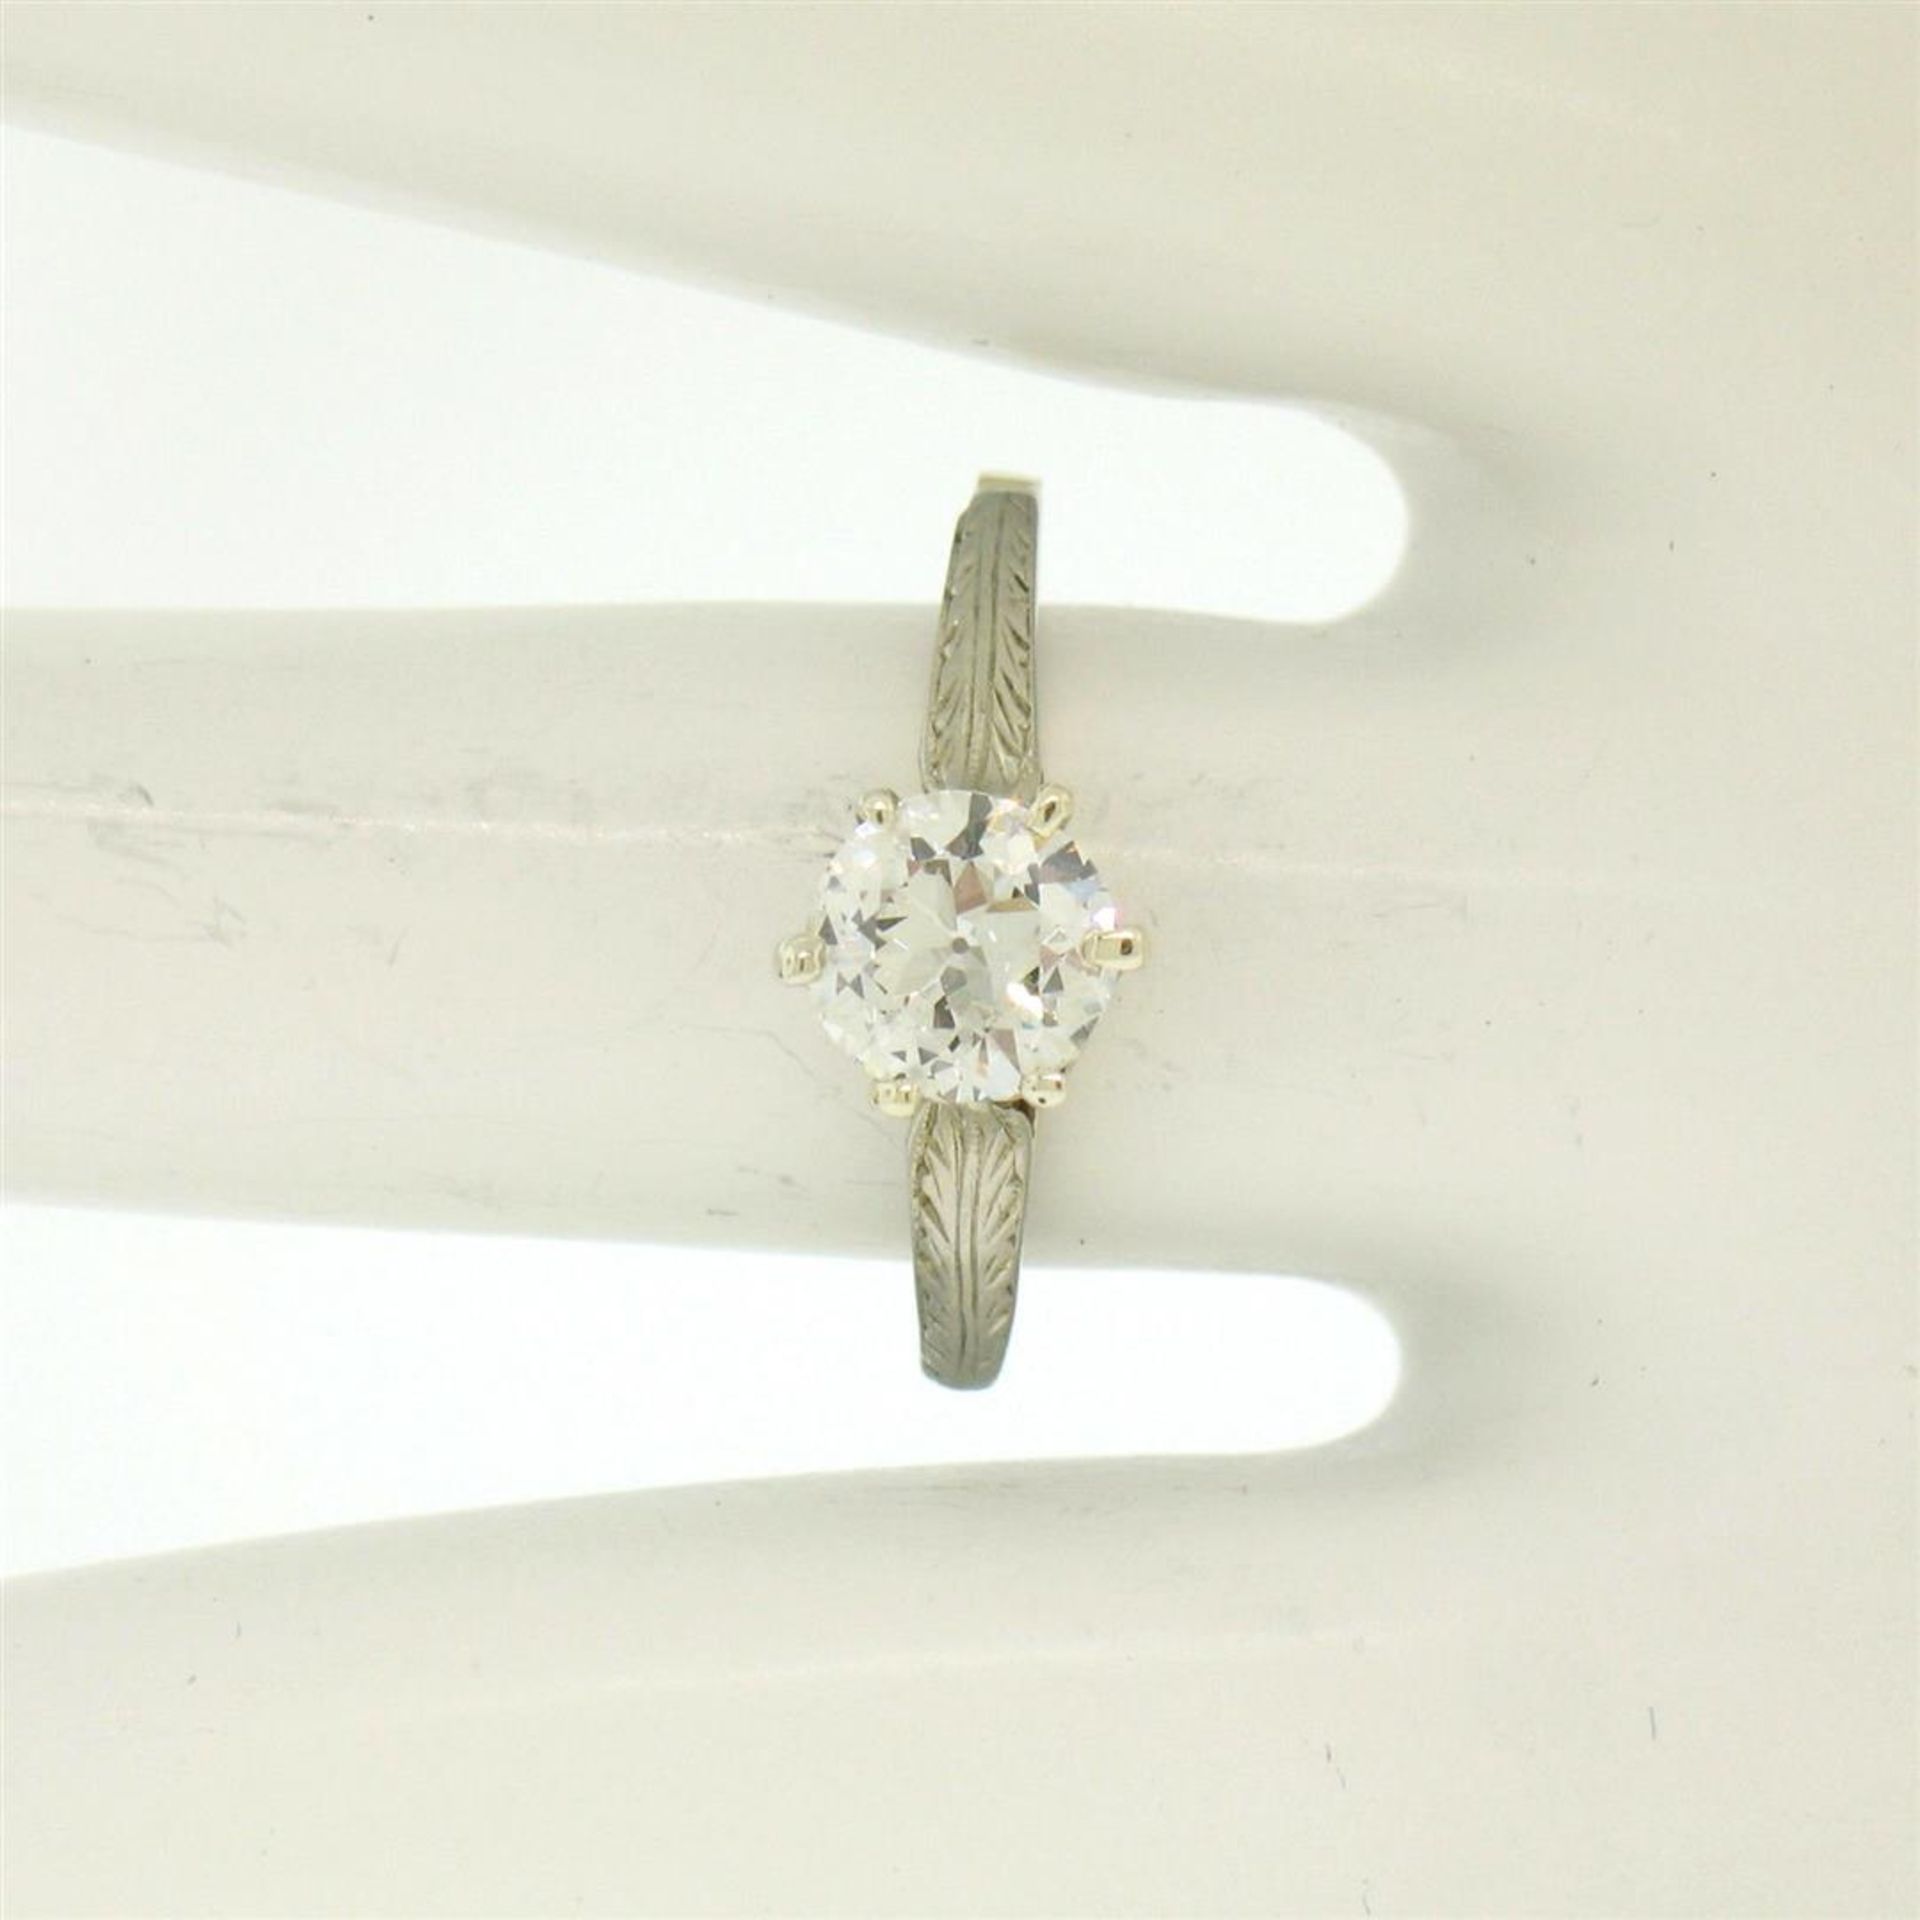 Etched 14k TT Gold .80 ctw European Cut Diamond Solitaire Engagement Ring - Image 4 of 7